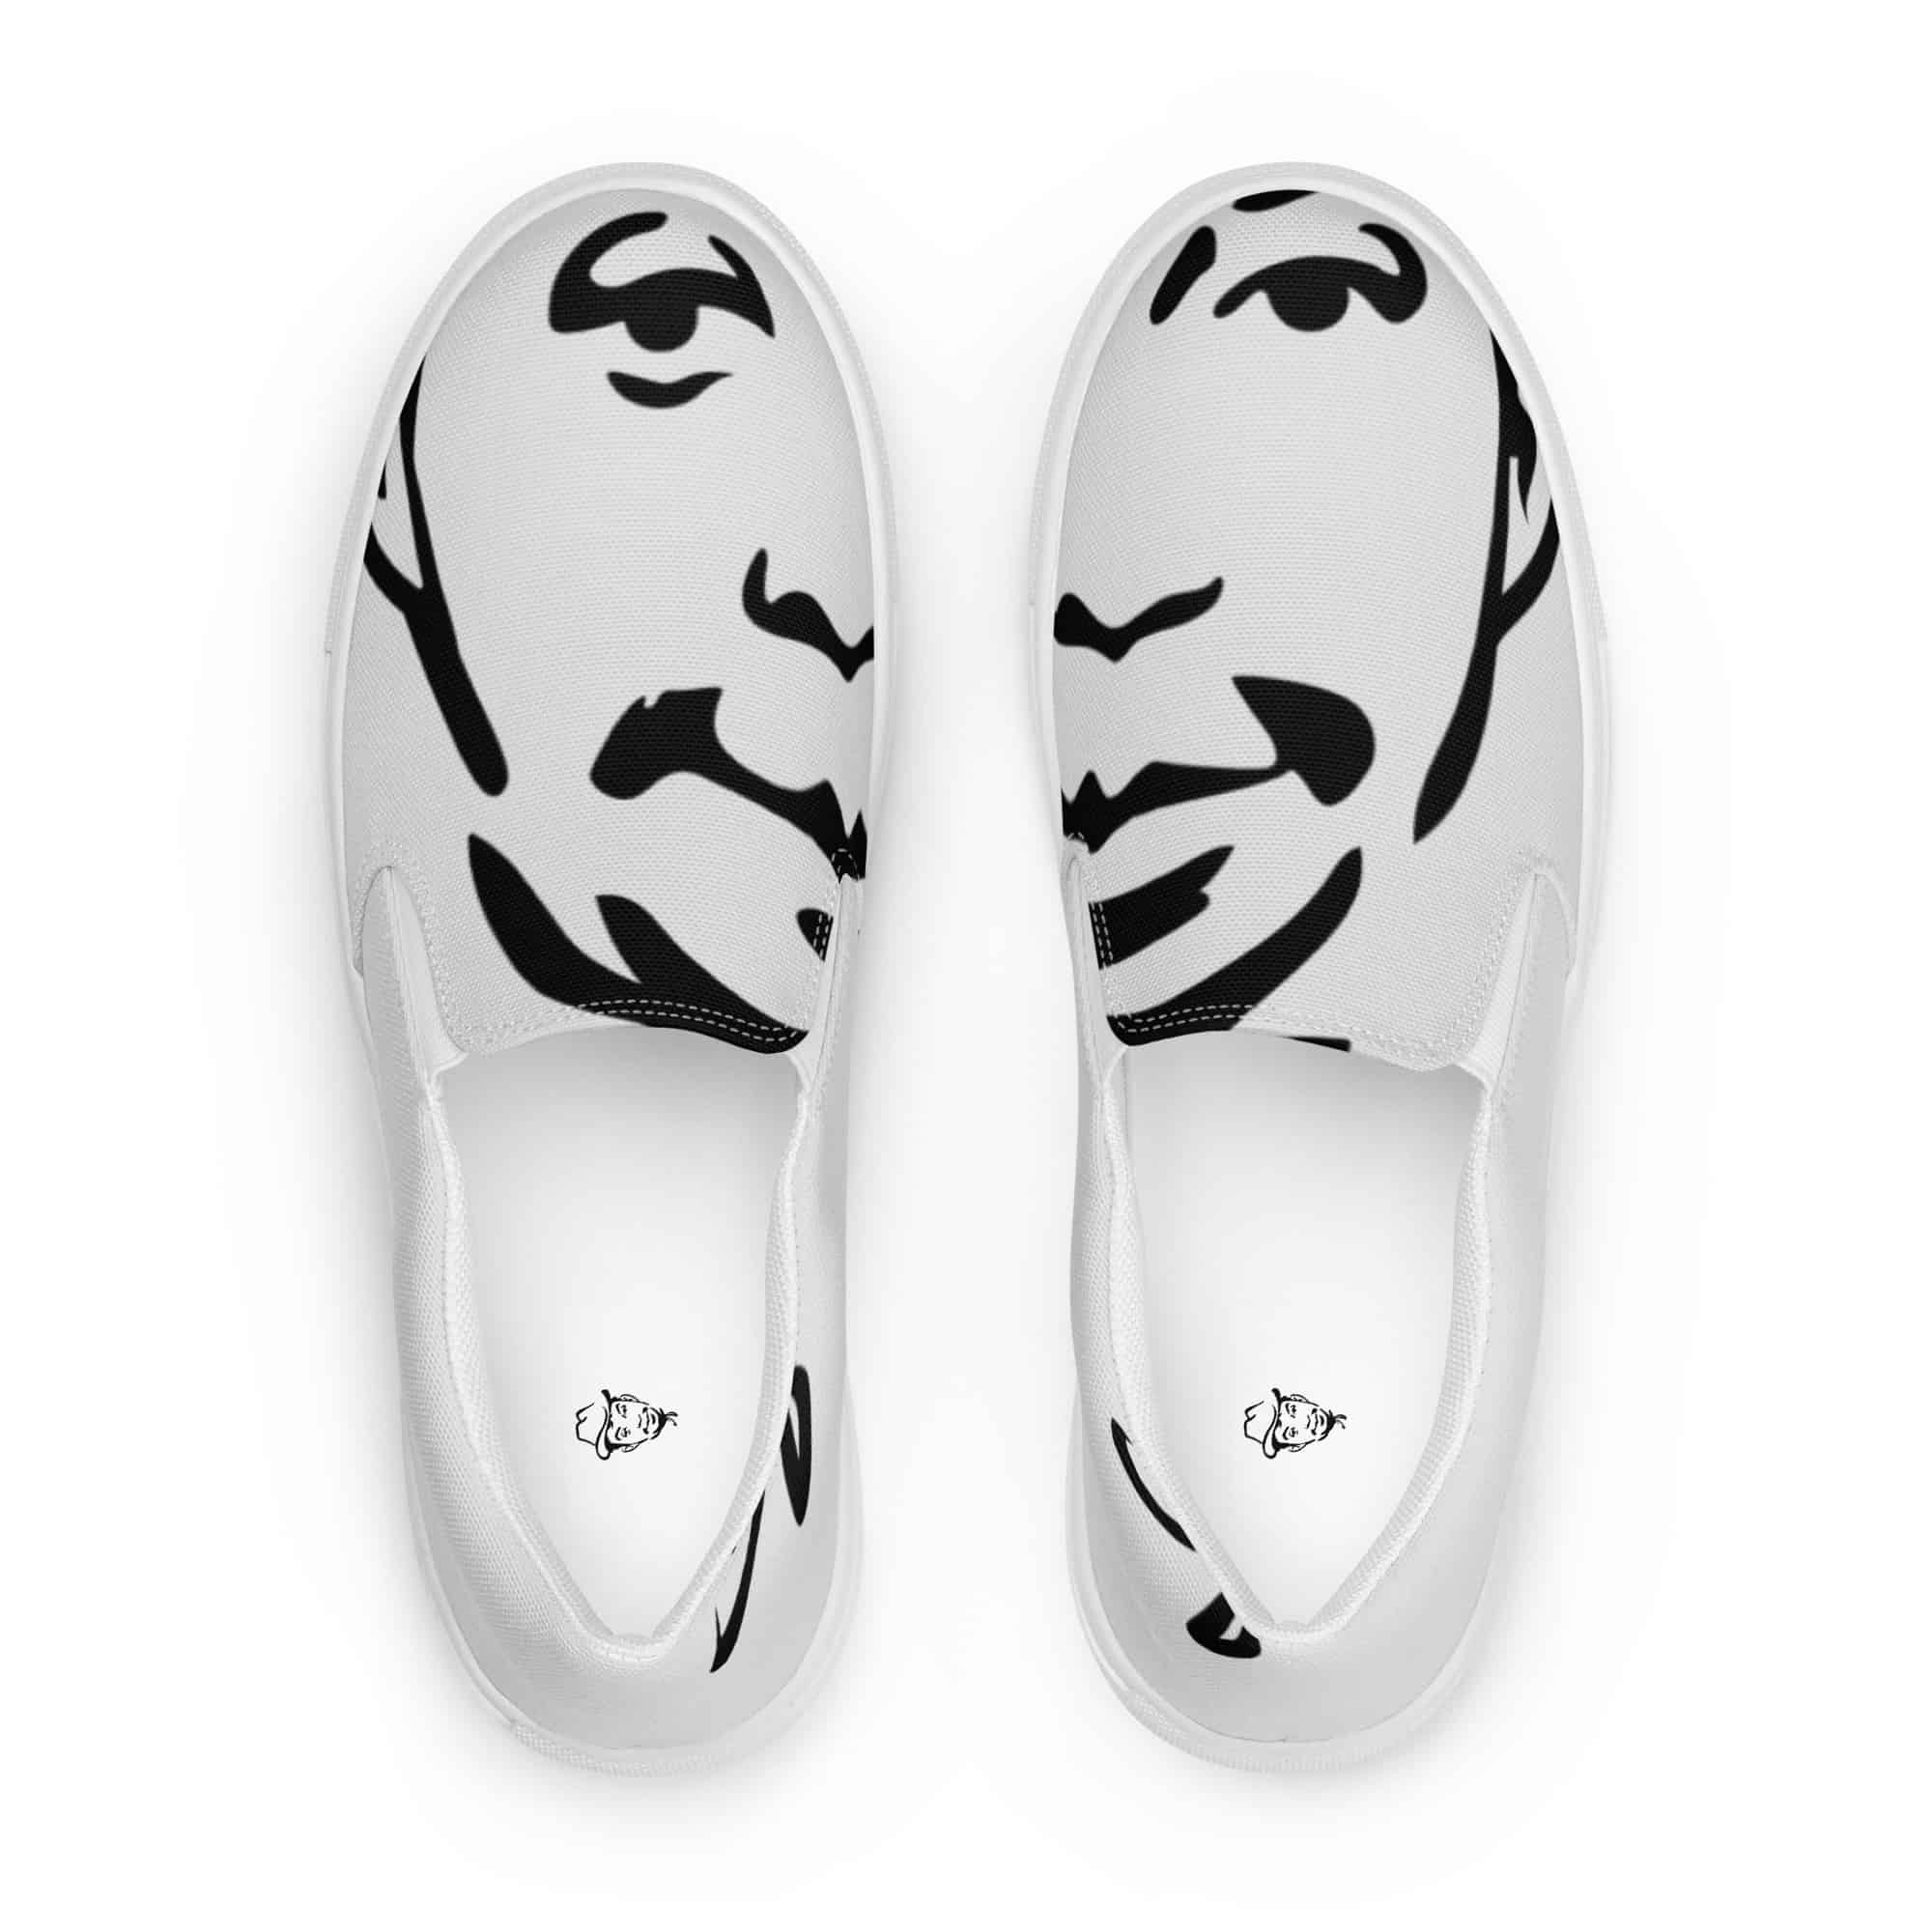 Cantinflas Shoes